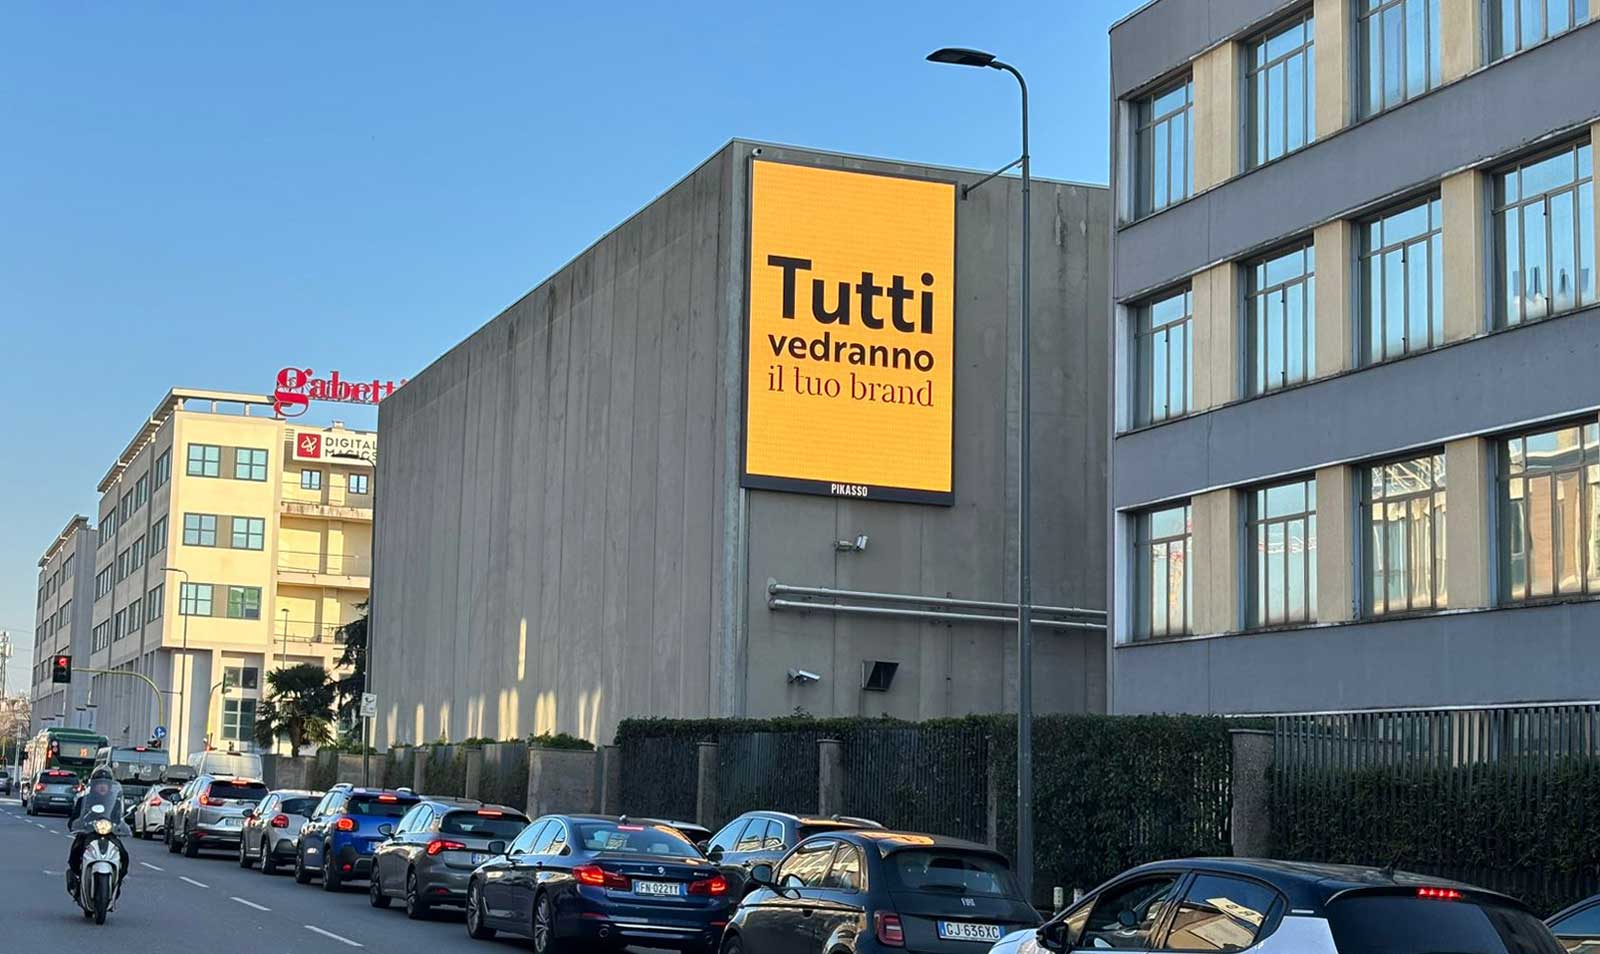 Pikasso Italia has announced the digitisation of the first wall of the 'Milano Collection' in Via Quaranta